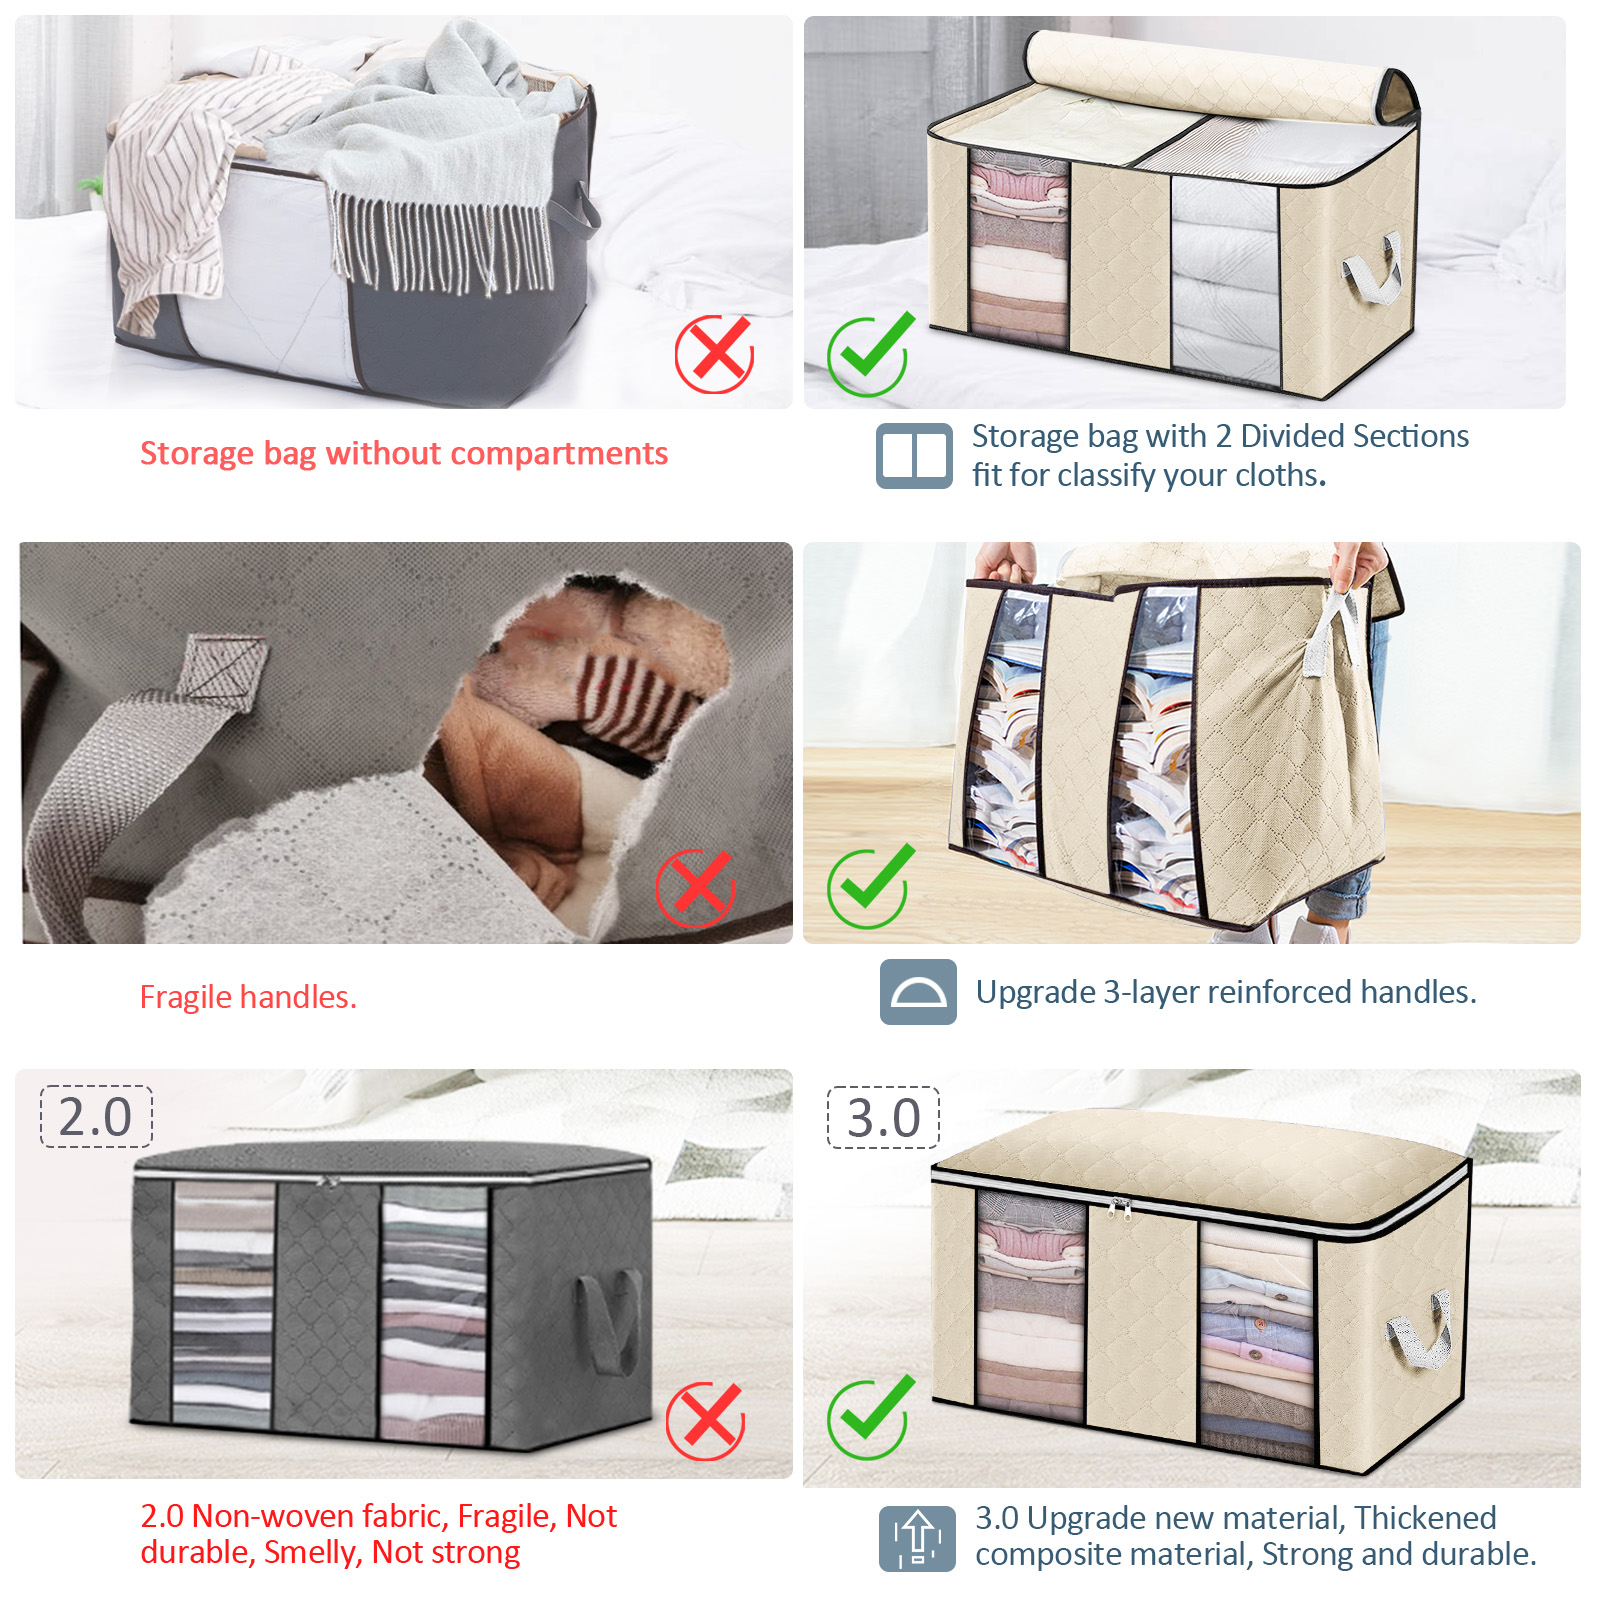 KING DO WAY 3PCS Clothes Storage Bag Non-woven Fabric Two-window Foldable Storage Bag